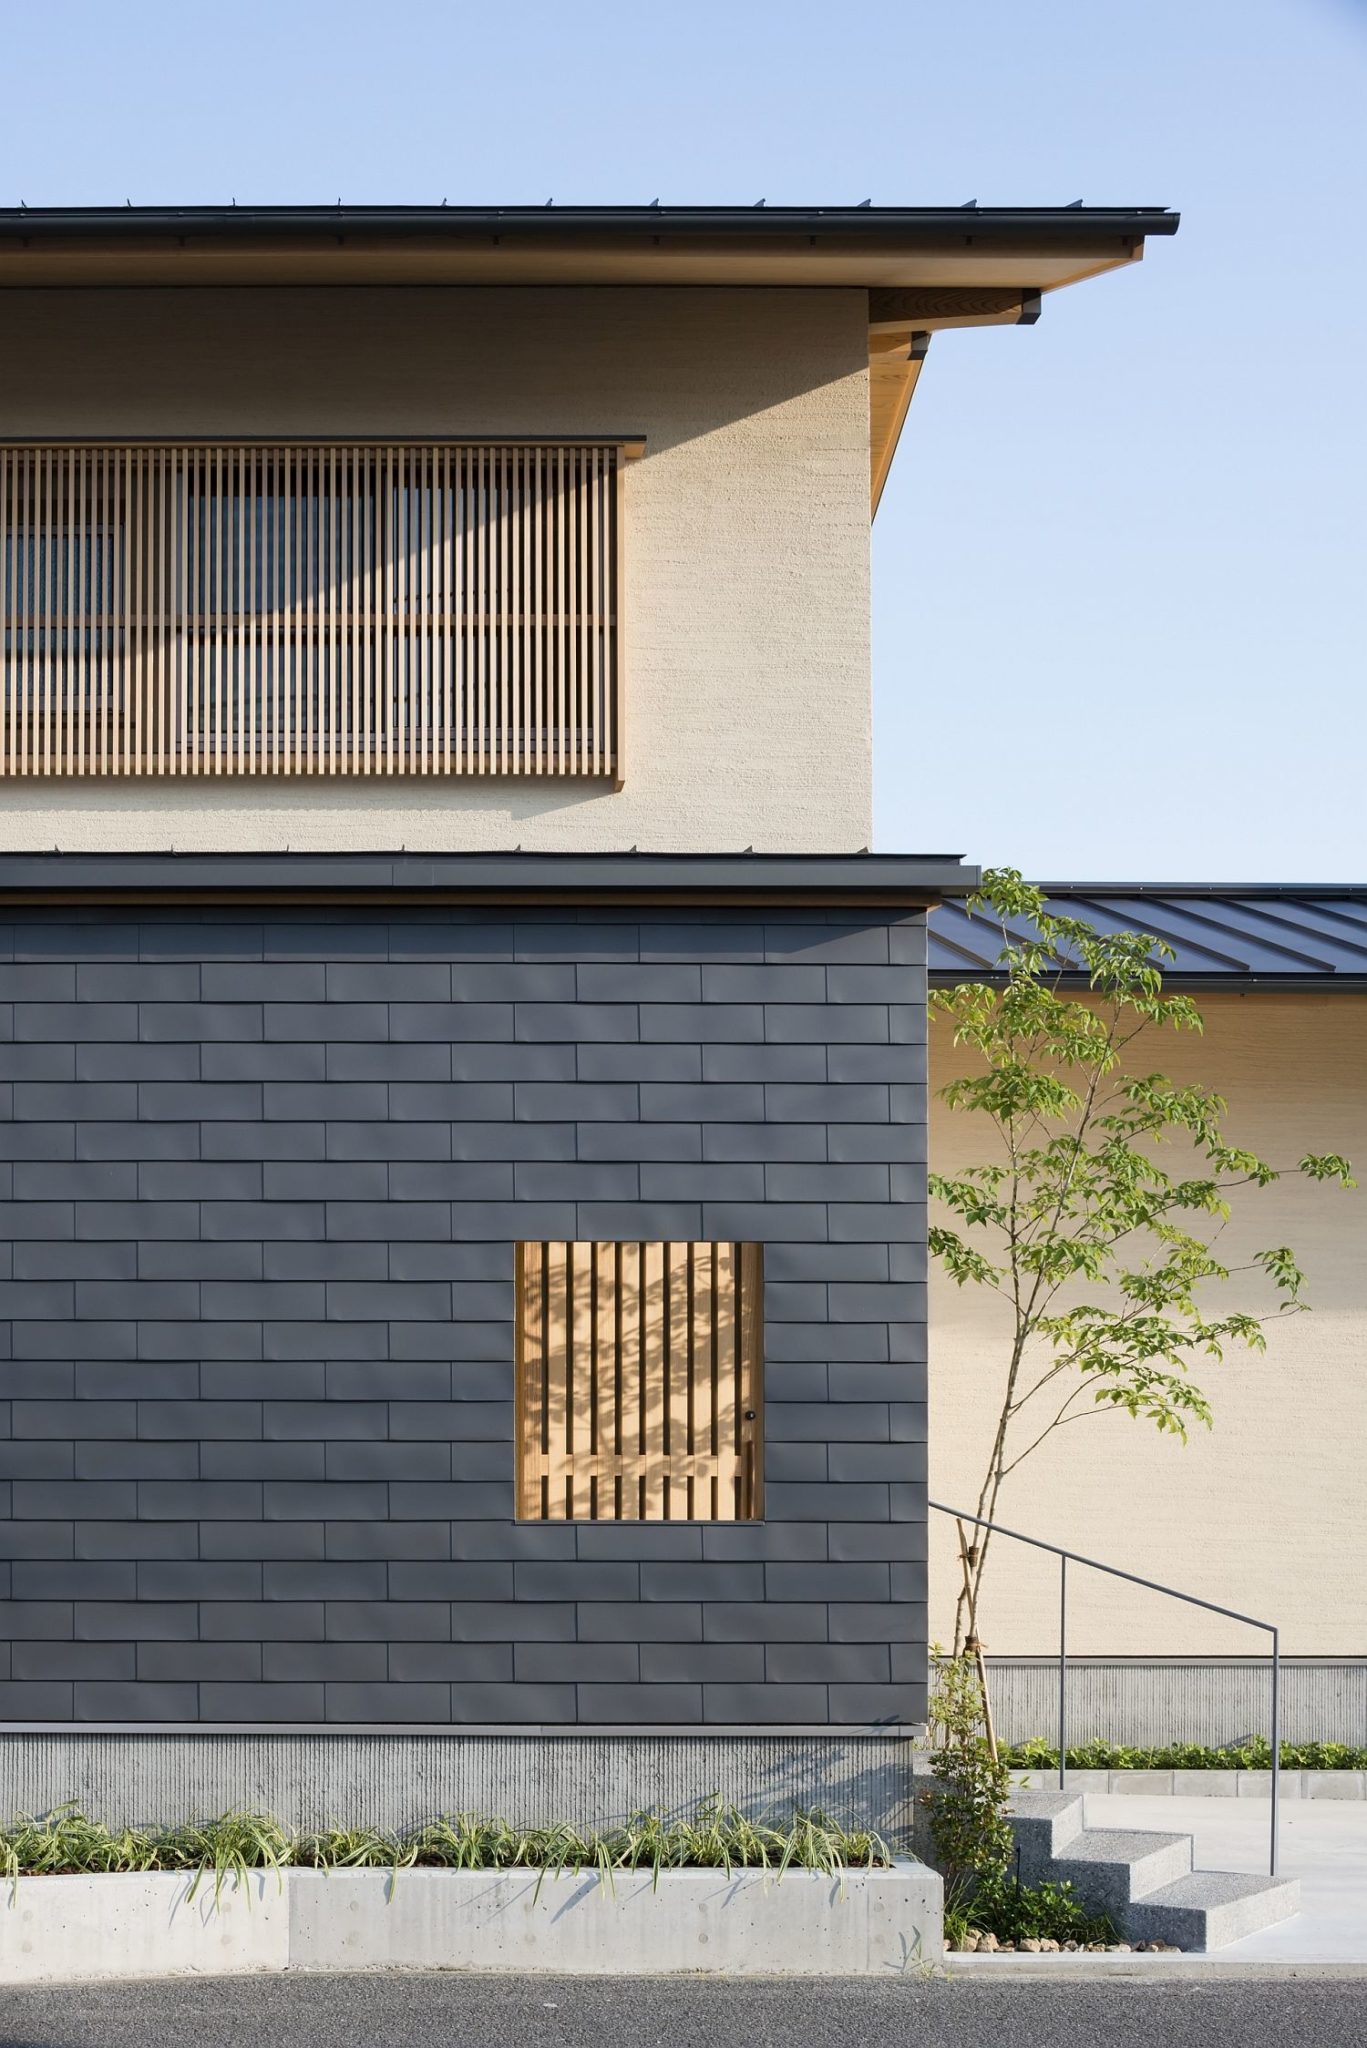 Gray exterior of the Japanese home combines modernity with traditional design